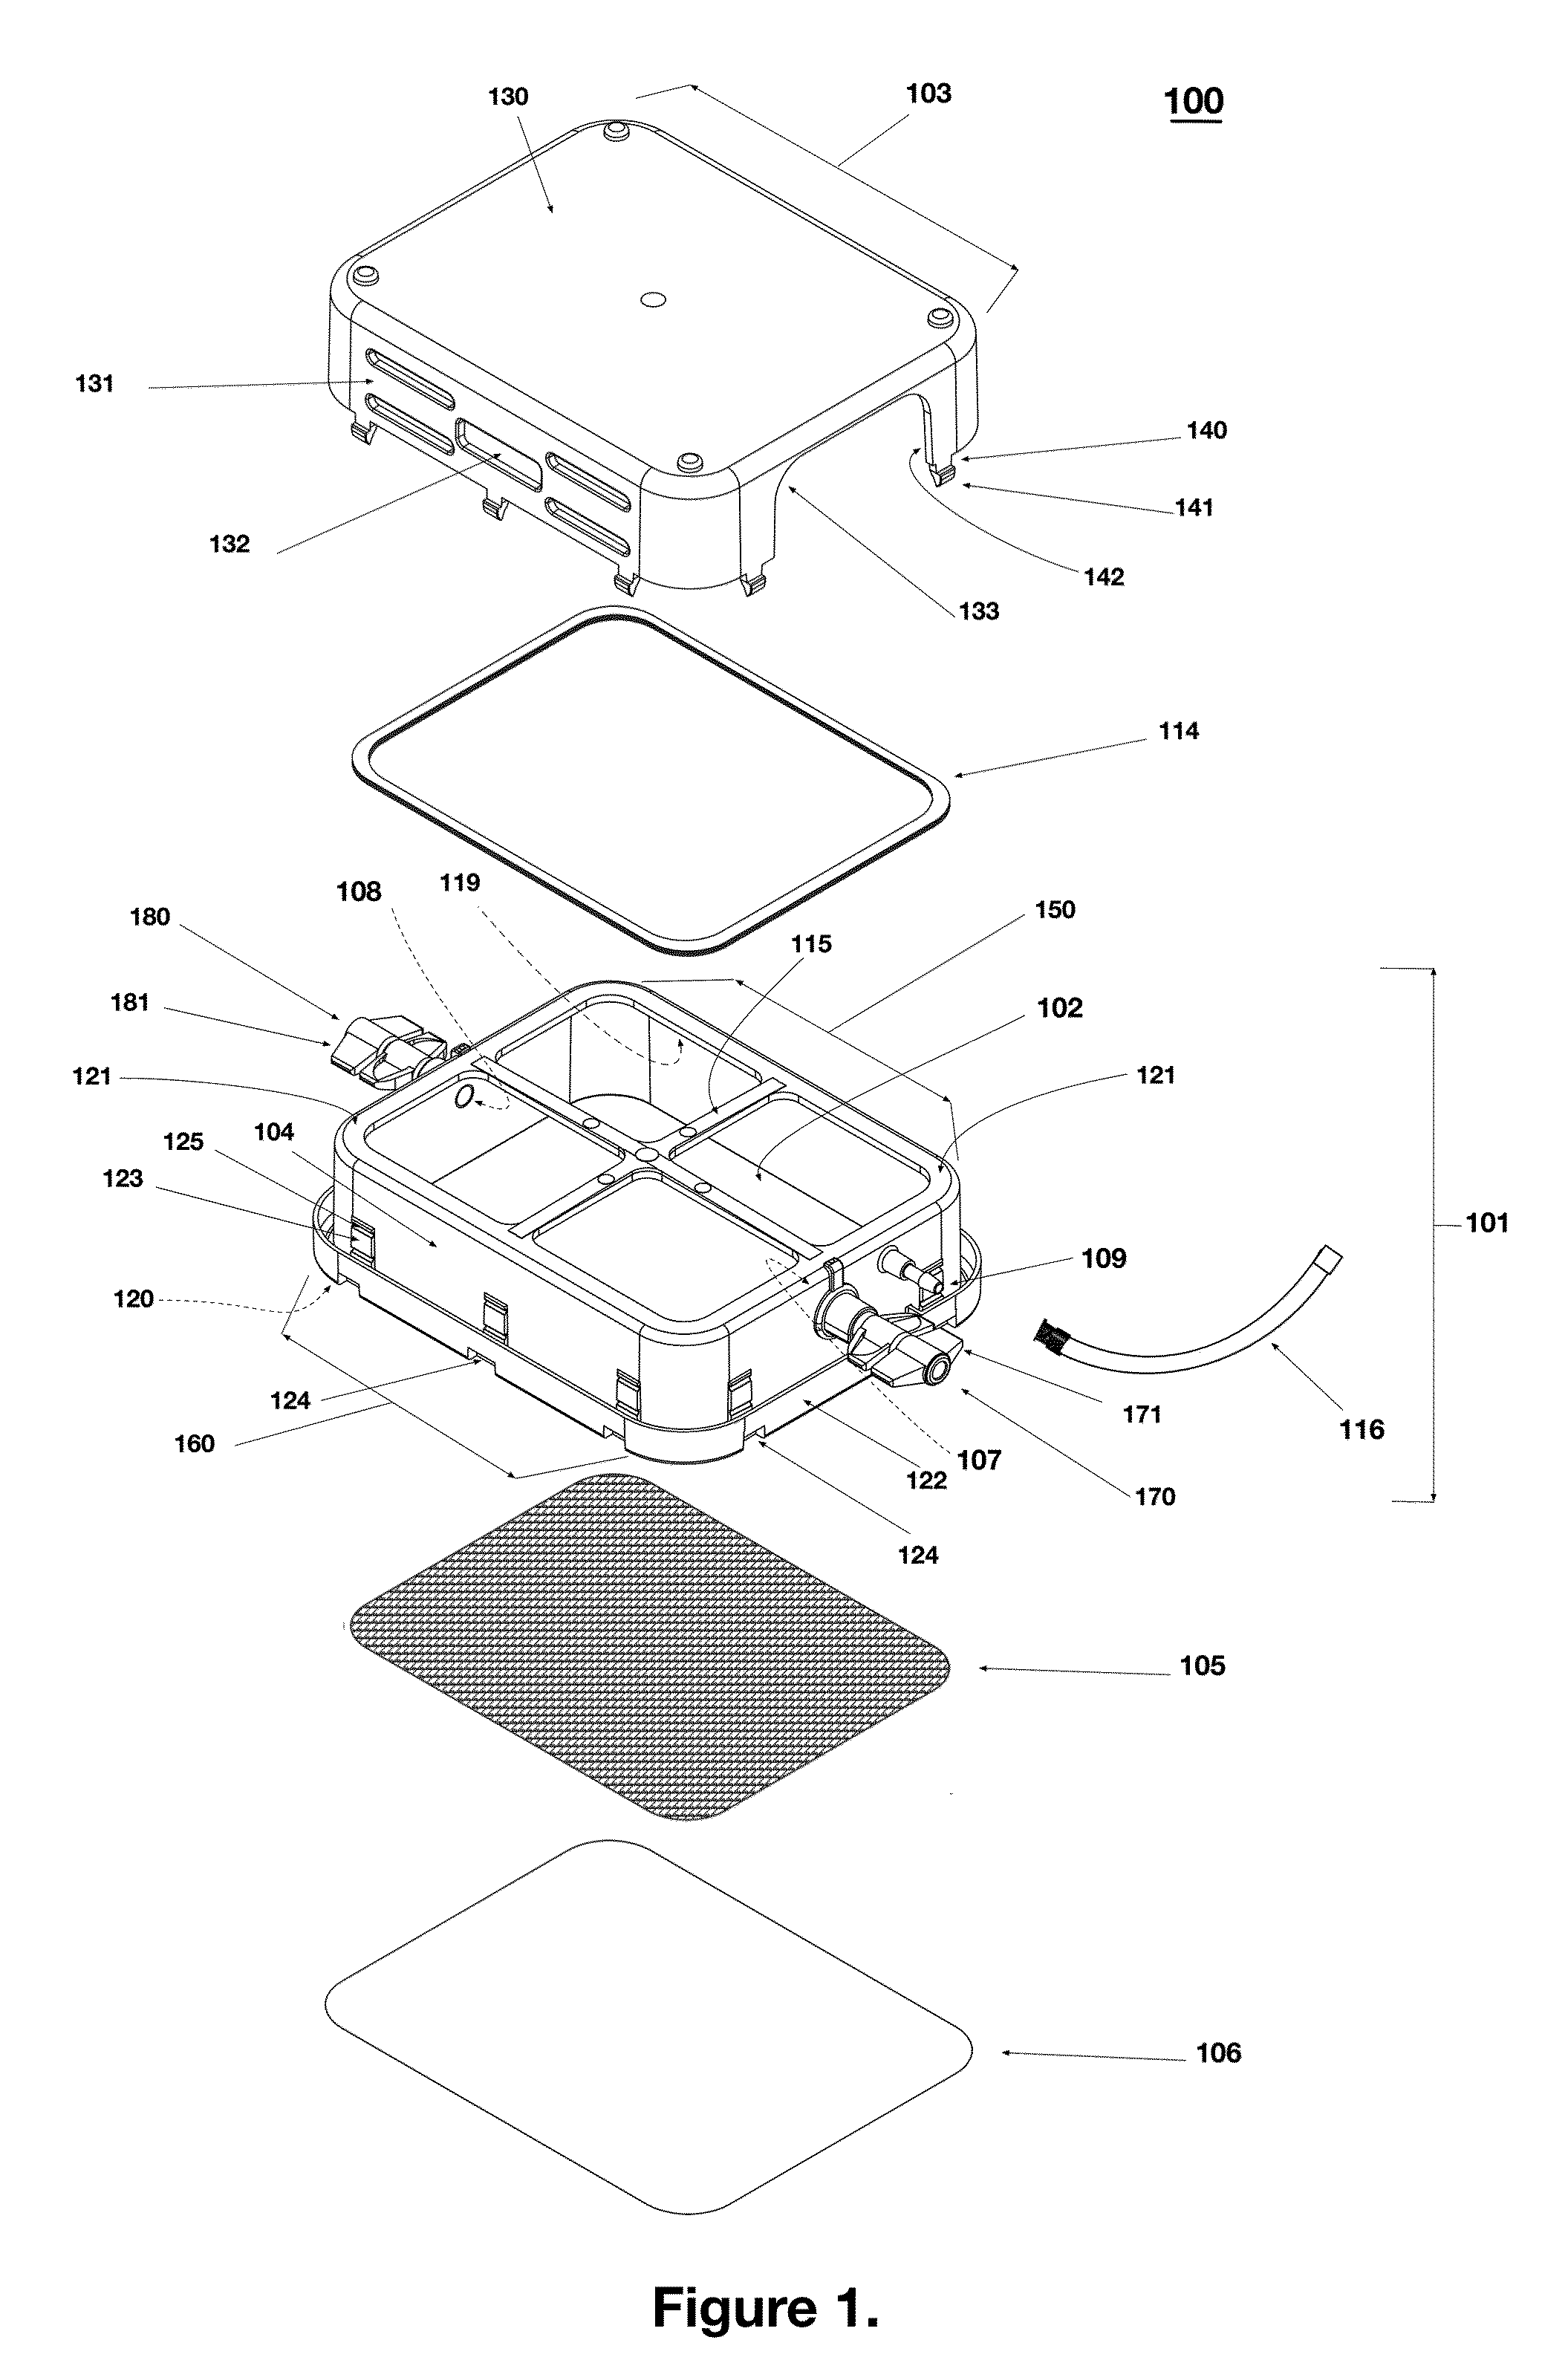 Low Aspect Ratio Staged Closure Devices, Systems, and Methods for Freeze-Drying, Storing, Reconstituting, and Administering Lyophilized Plasma